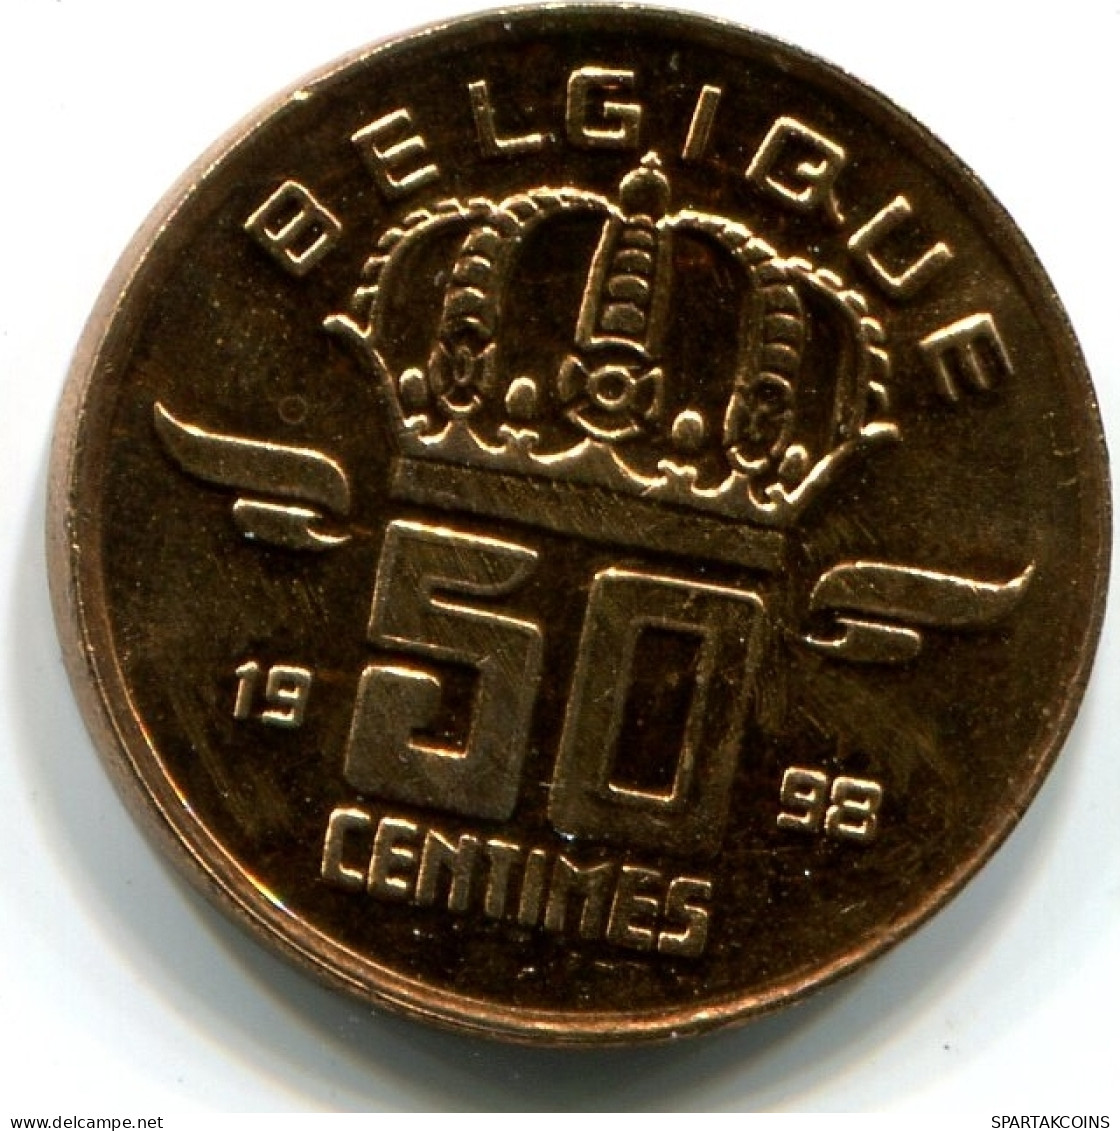 50 CENTIMES 1998 FRENCH Text BELGIUM Coin UNC #W10966.U - 50 Centimes